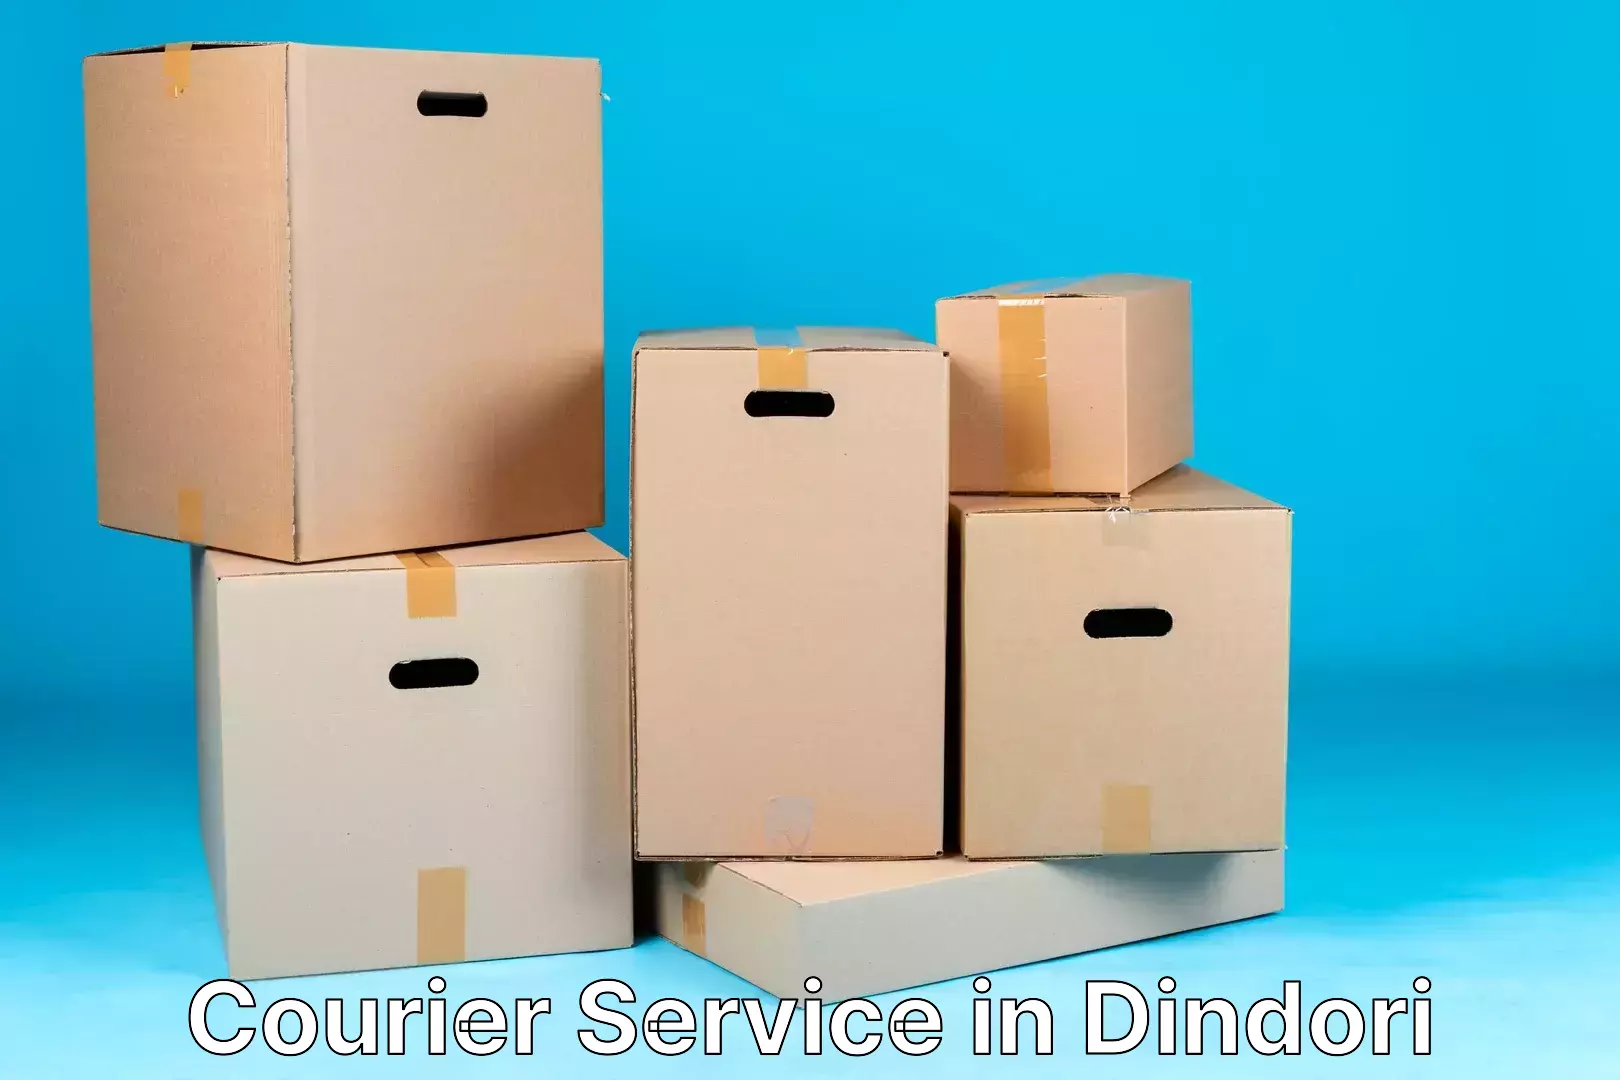 Efficient package consolidation in Dindori